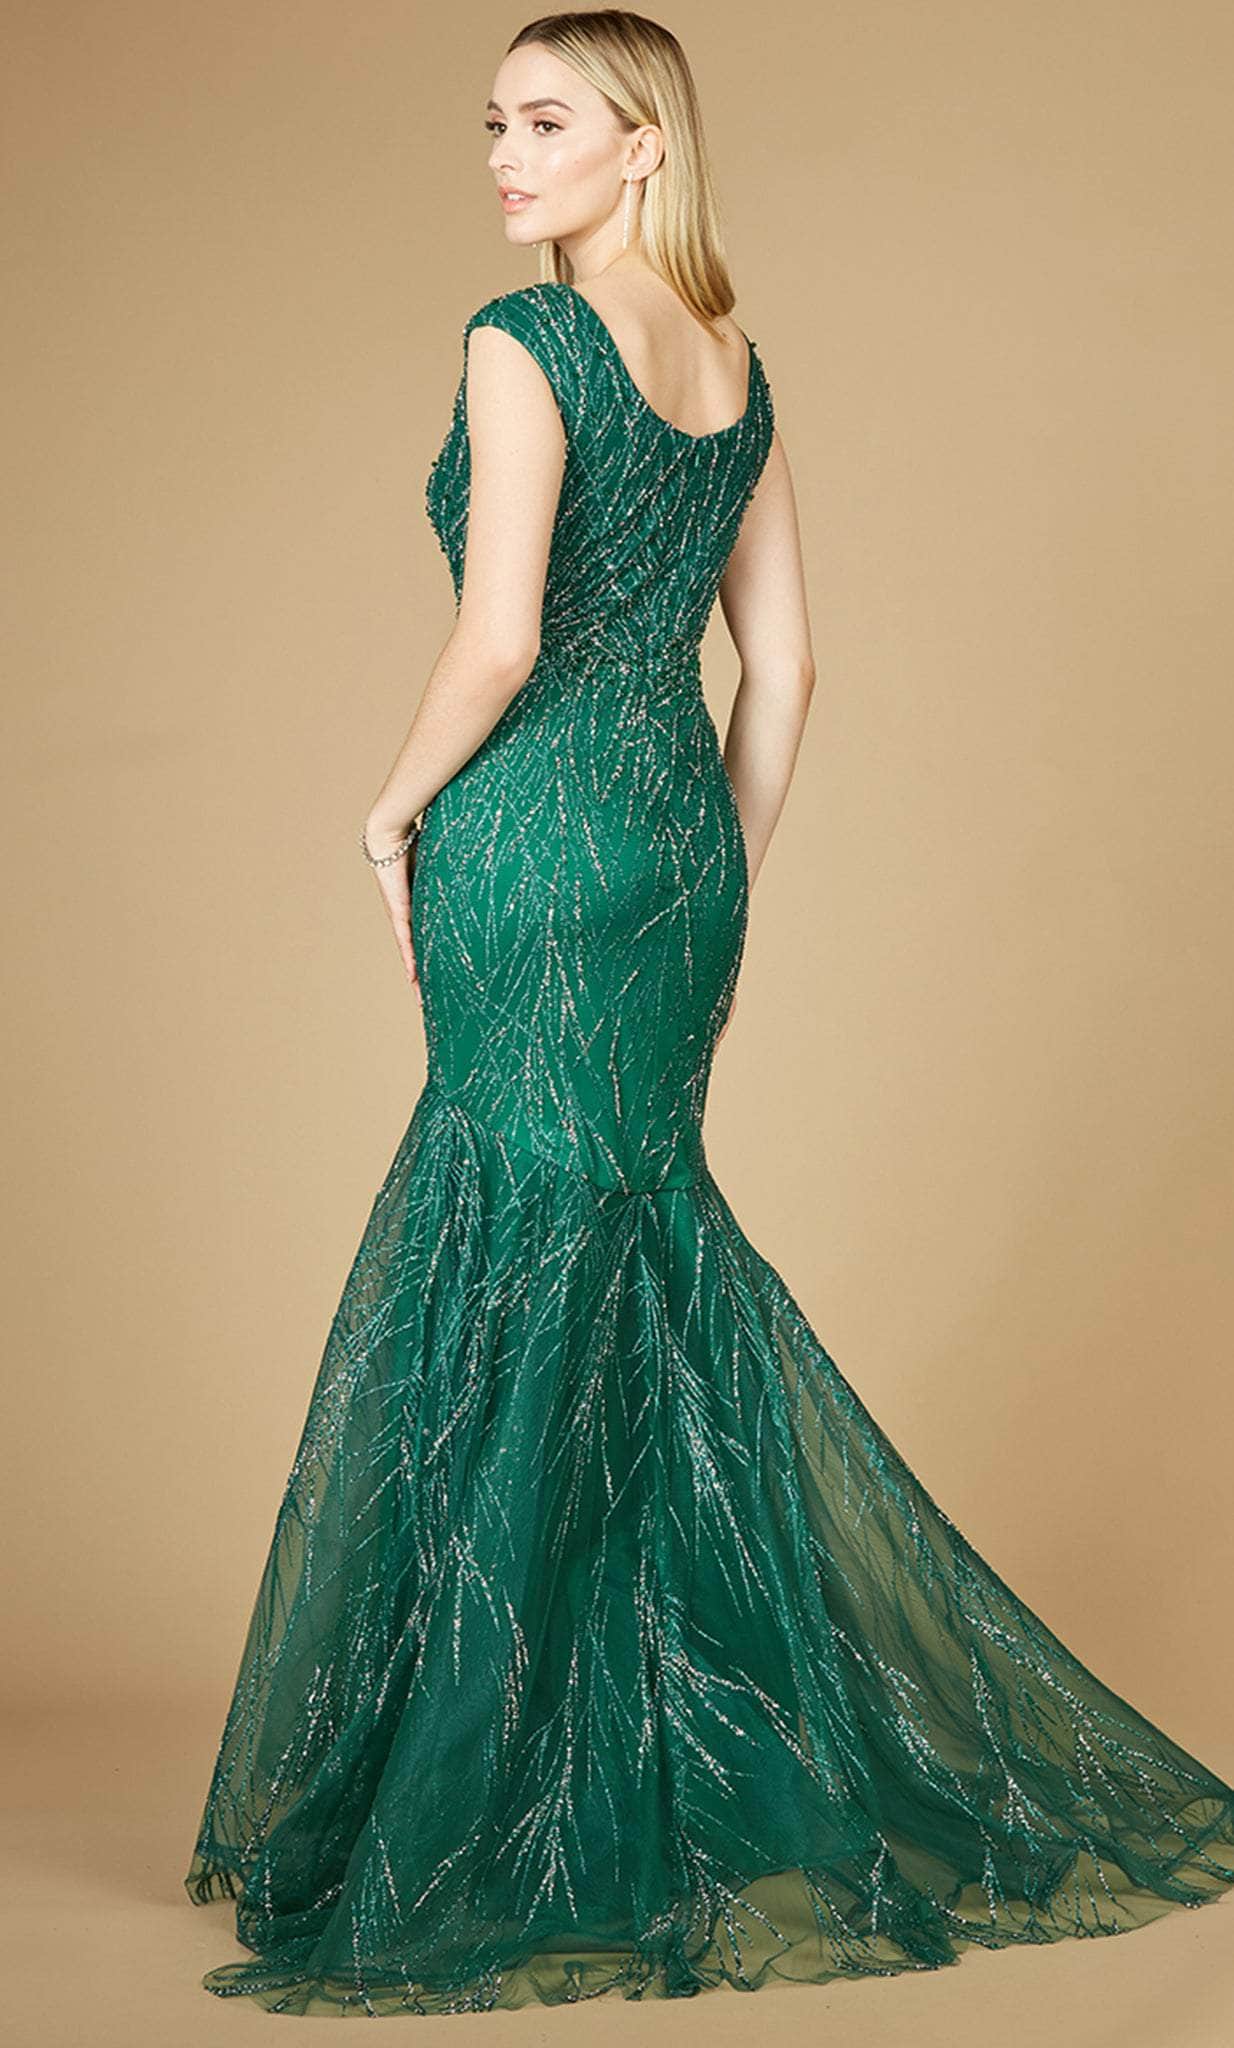 Lara Dresses 29233 - Queen Anne Neck Mermaid Gown Special Occasion Dress